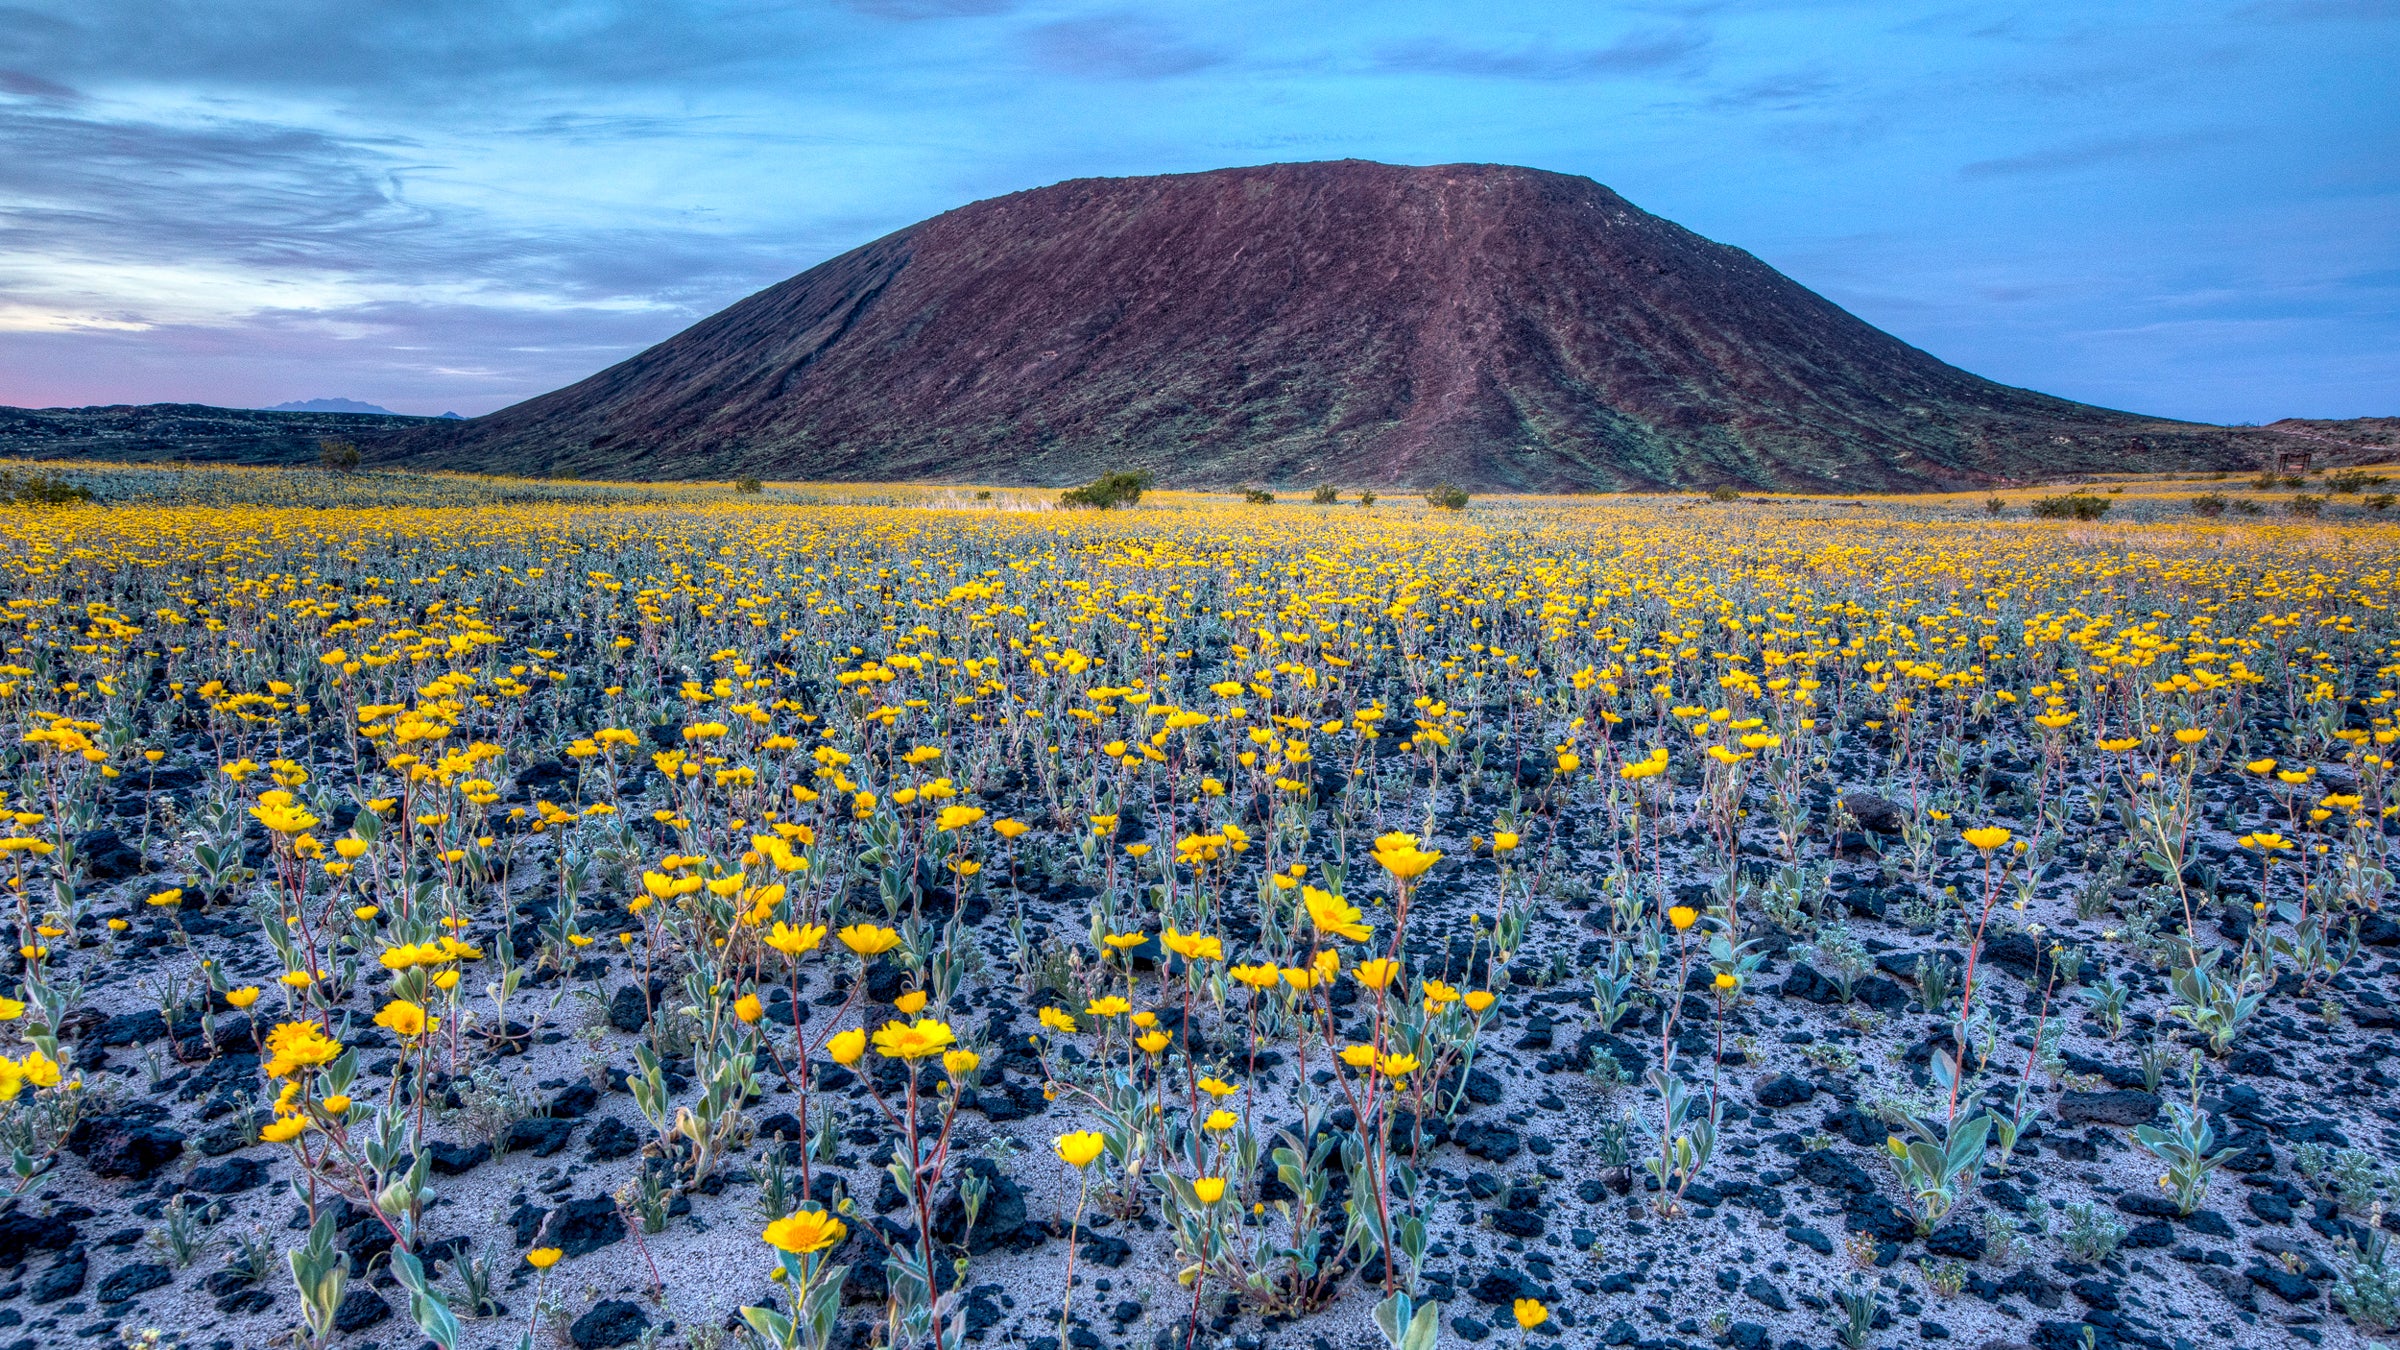 A Field Guide to the Common Wildflowers of the Mojave Desert Adult Pic Hq